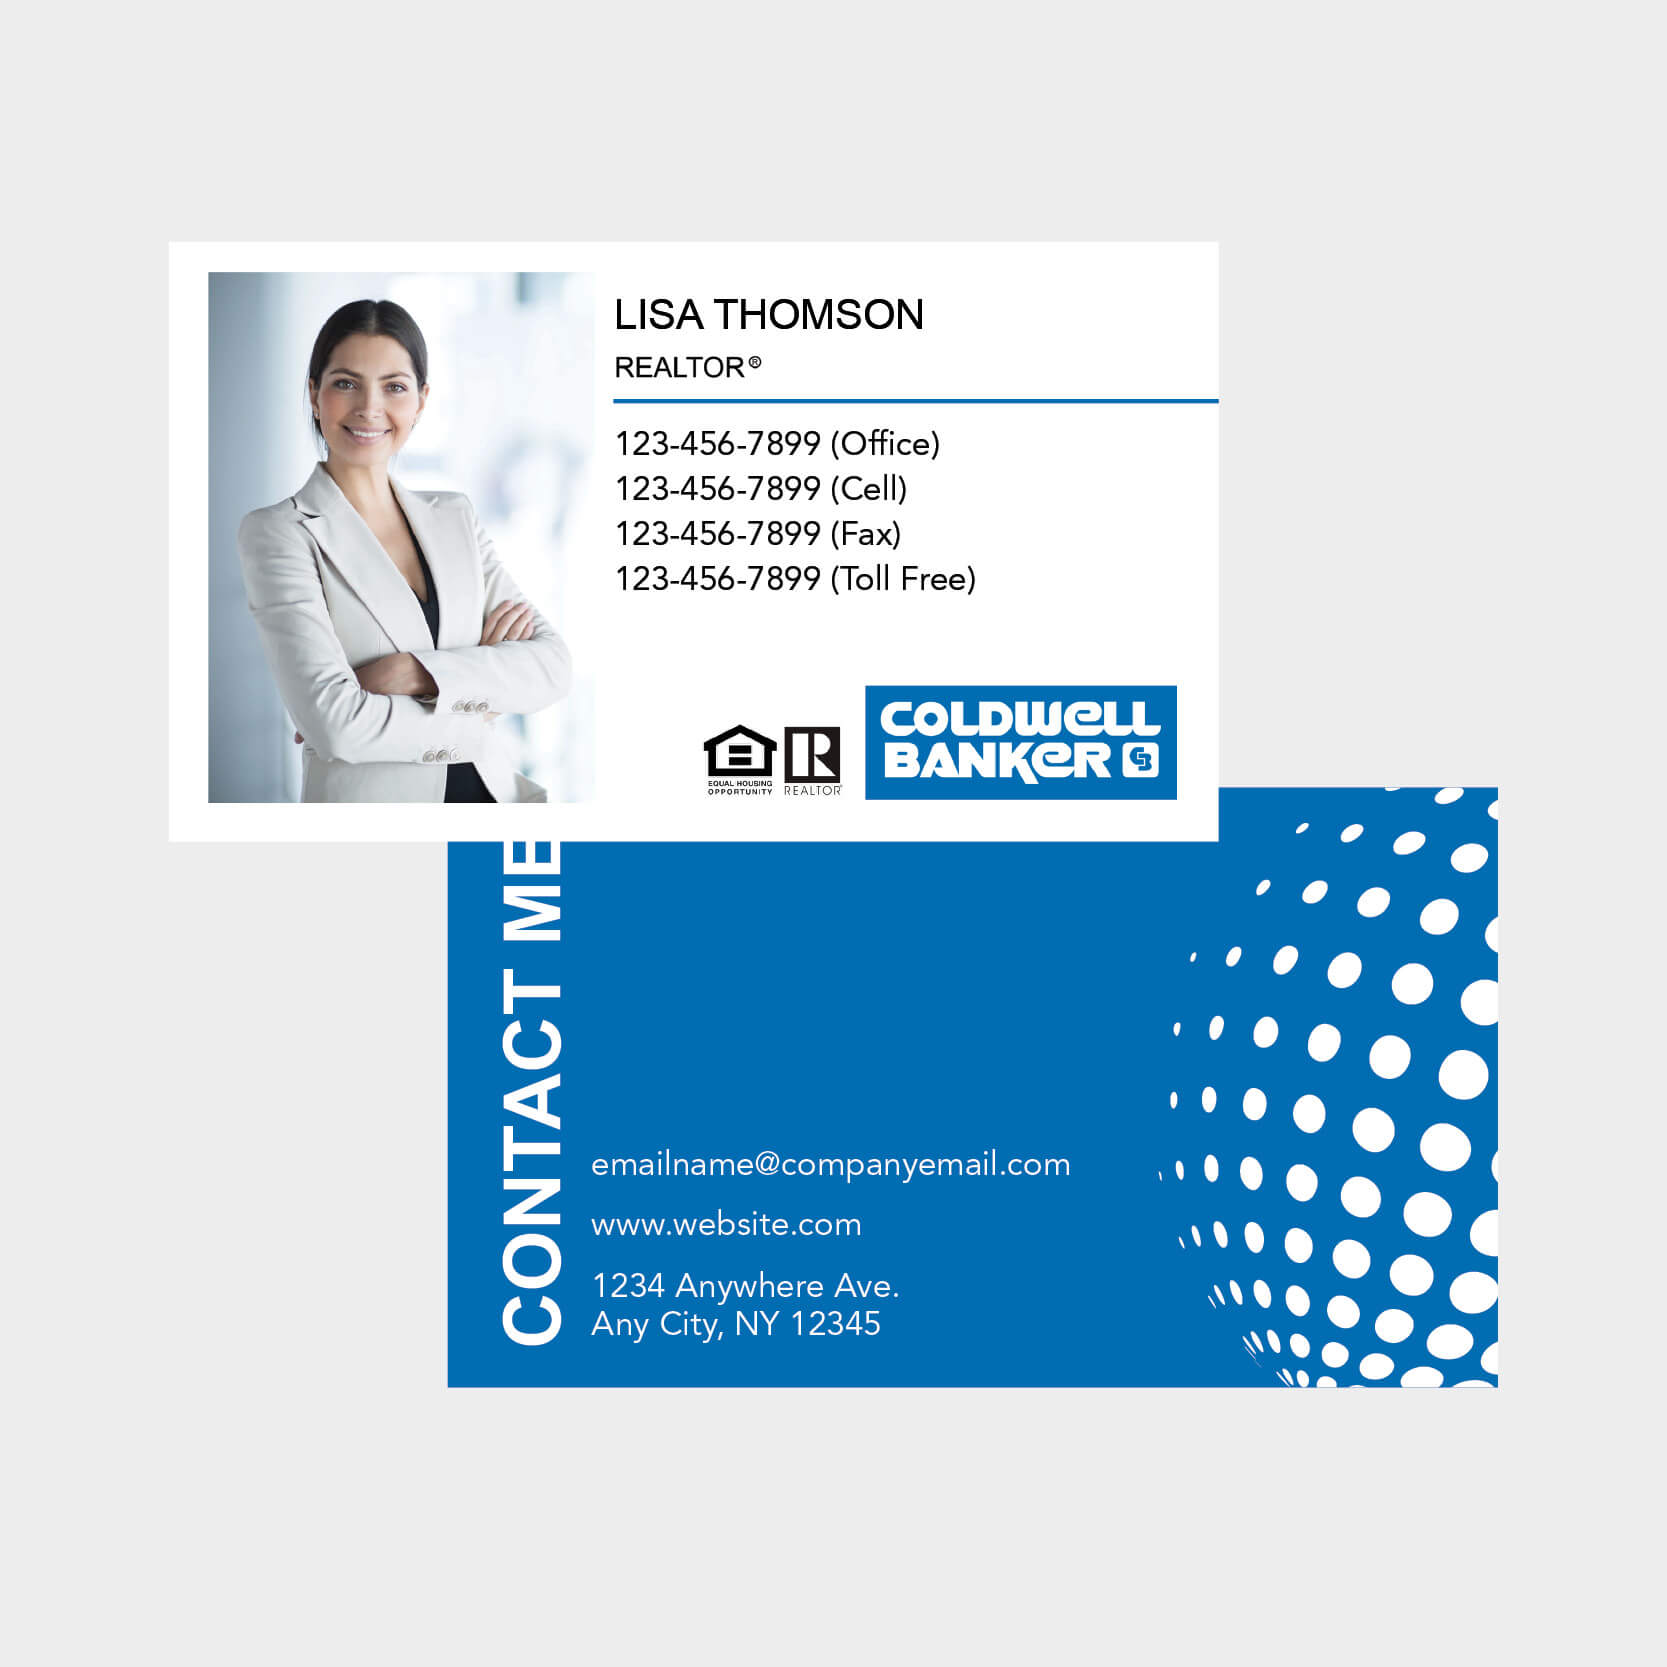 Coldwell Banker Business Cards Intended For Coldwell Banker Business Card Template